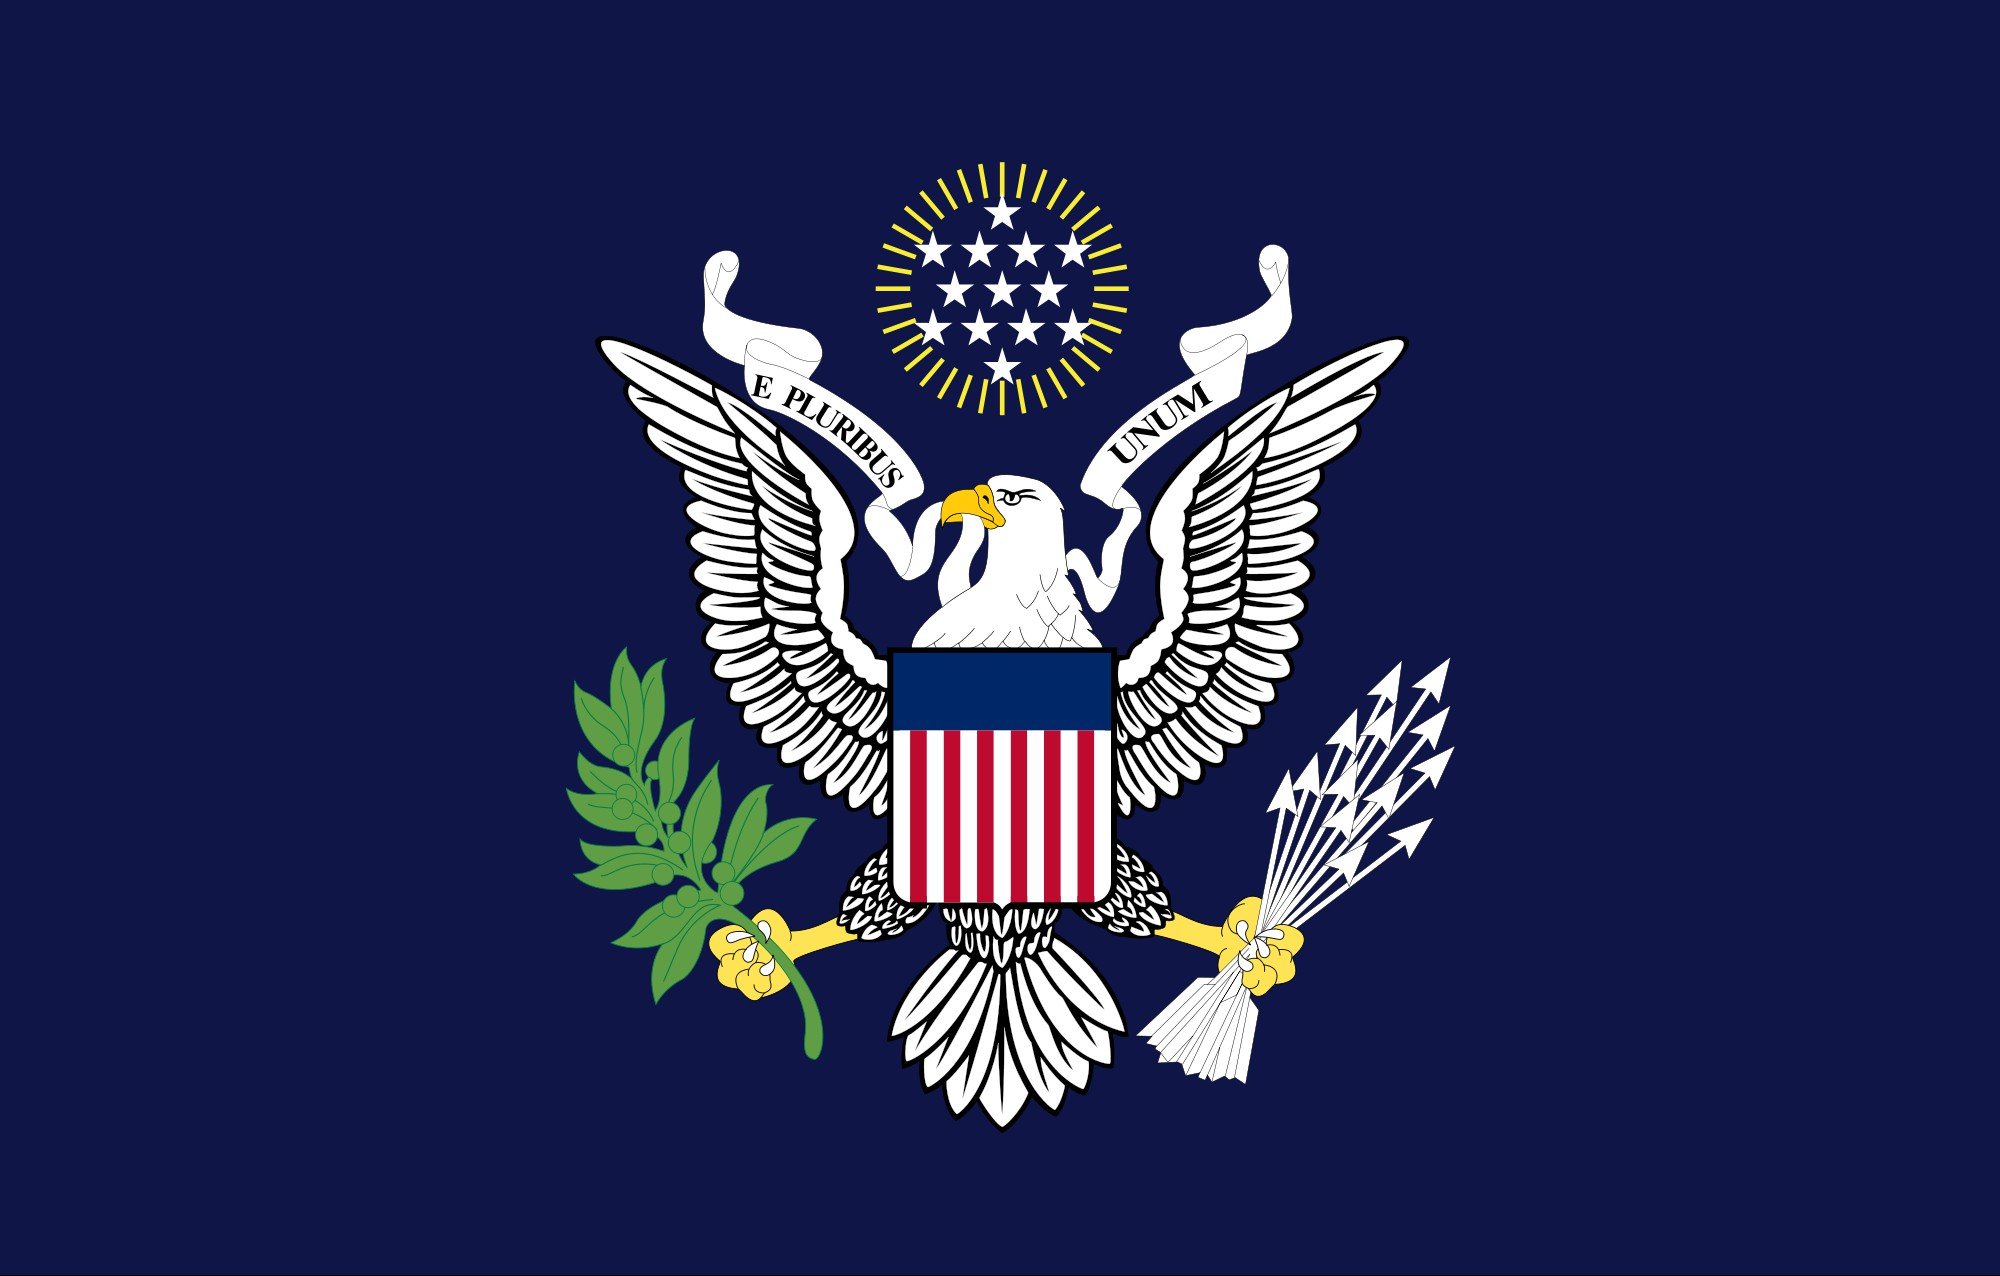 United States Of America Wallpapers